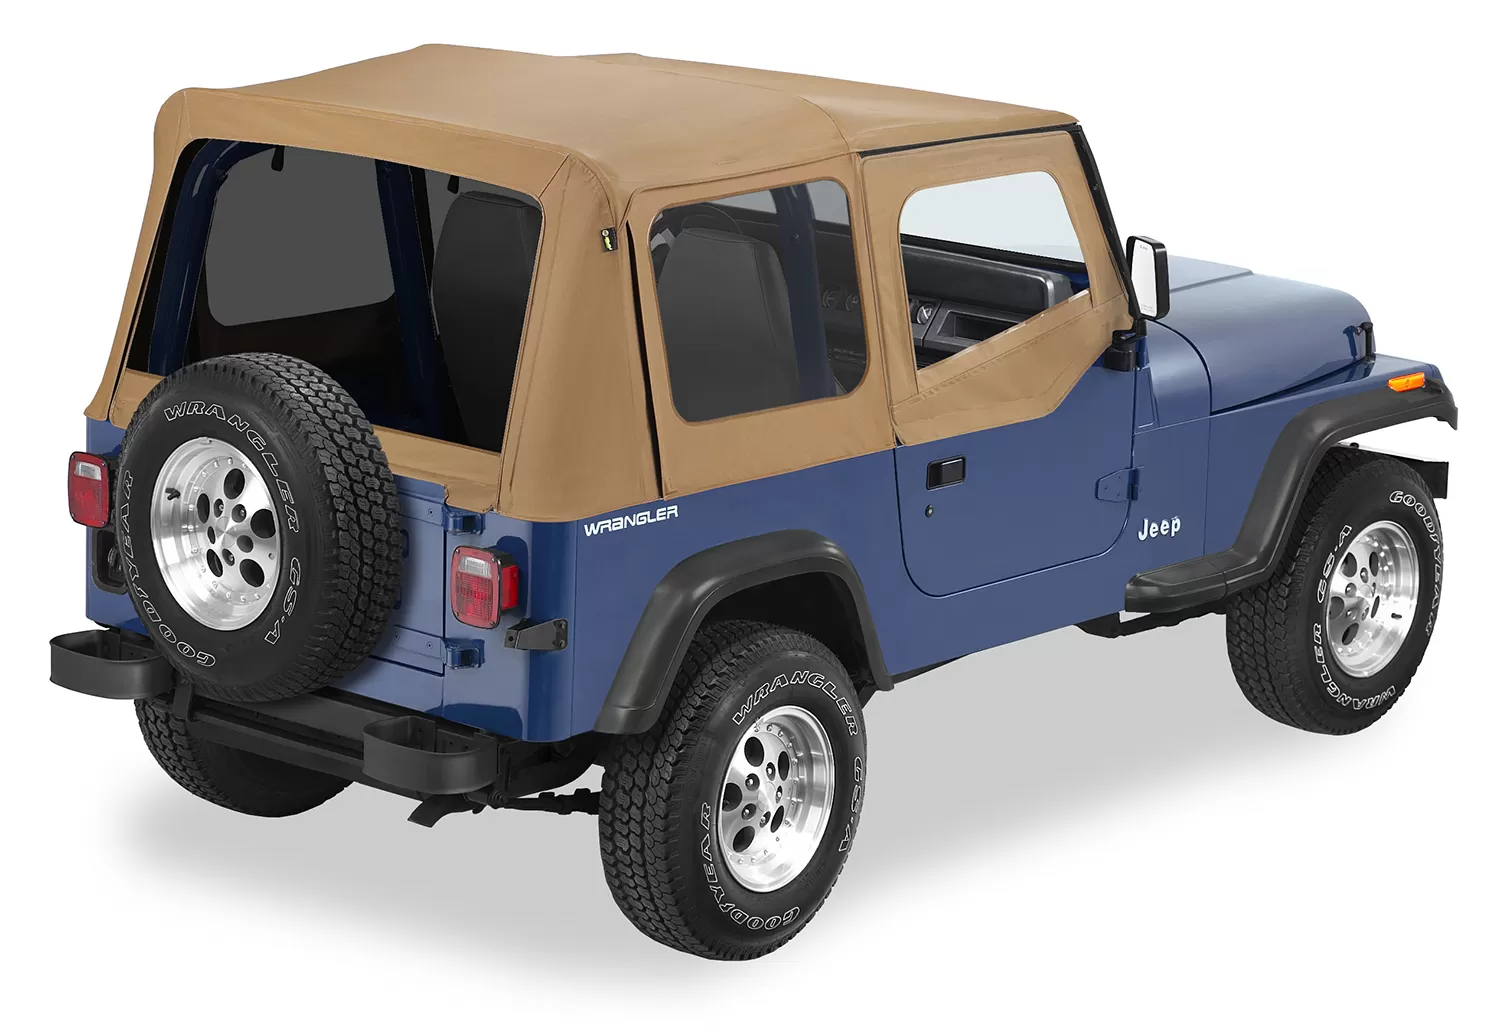 Bestop Spice Sailcloth Replace-a-Top Tinted Windows w/ Upper Door Skins Jeep Wrangler 1988-1995 - 79123-37